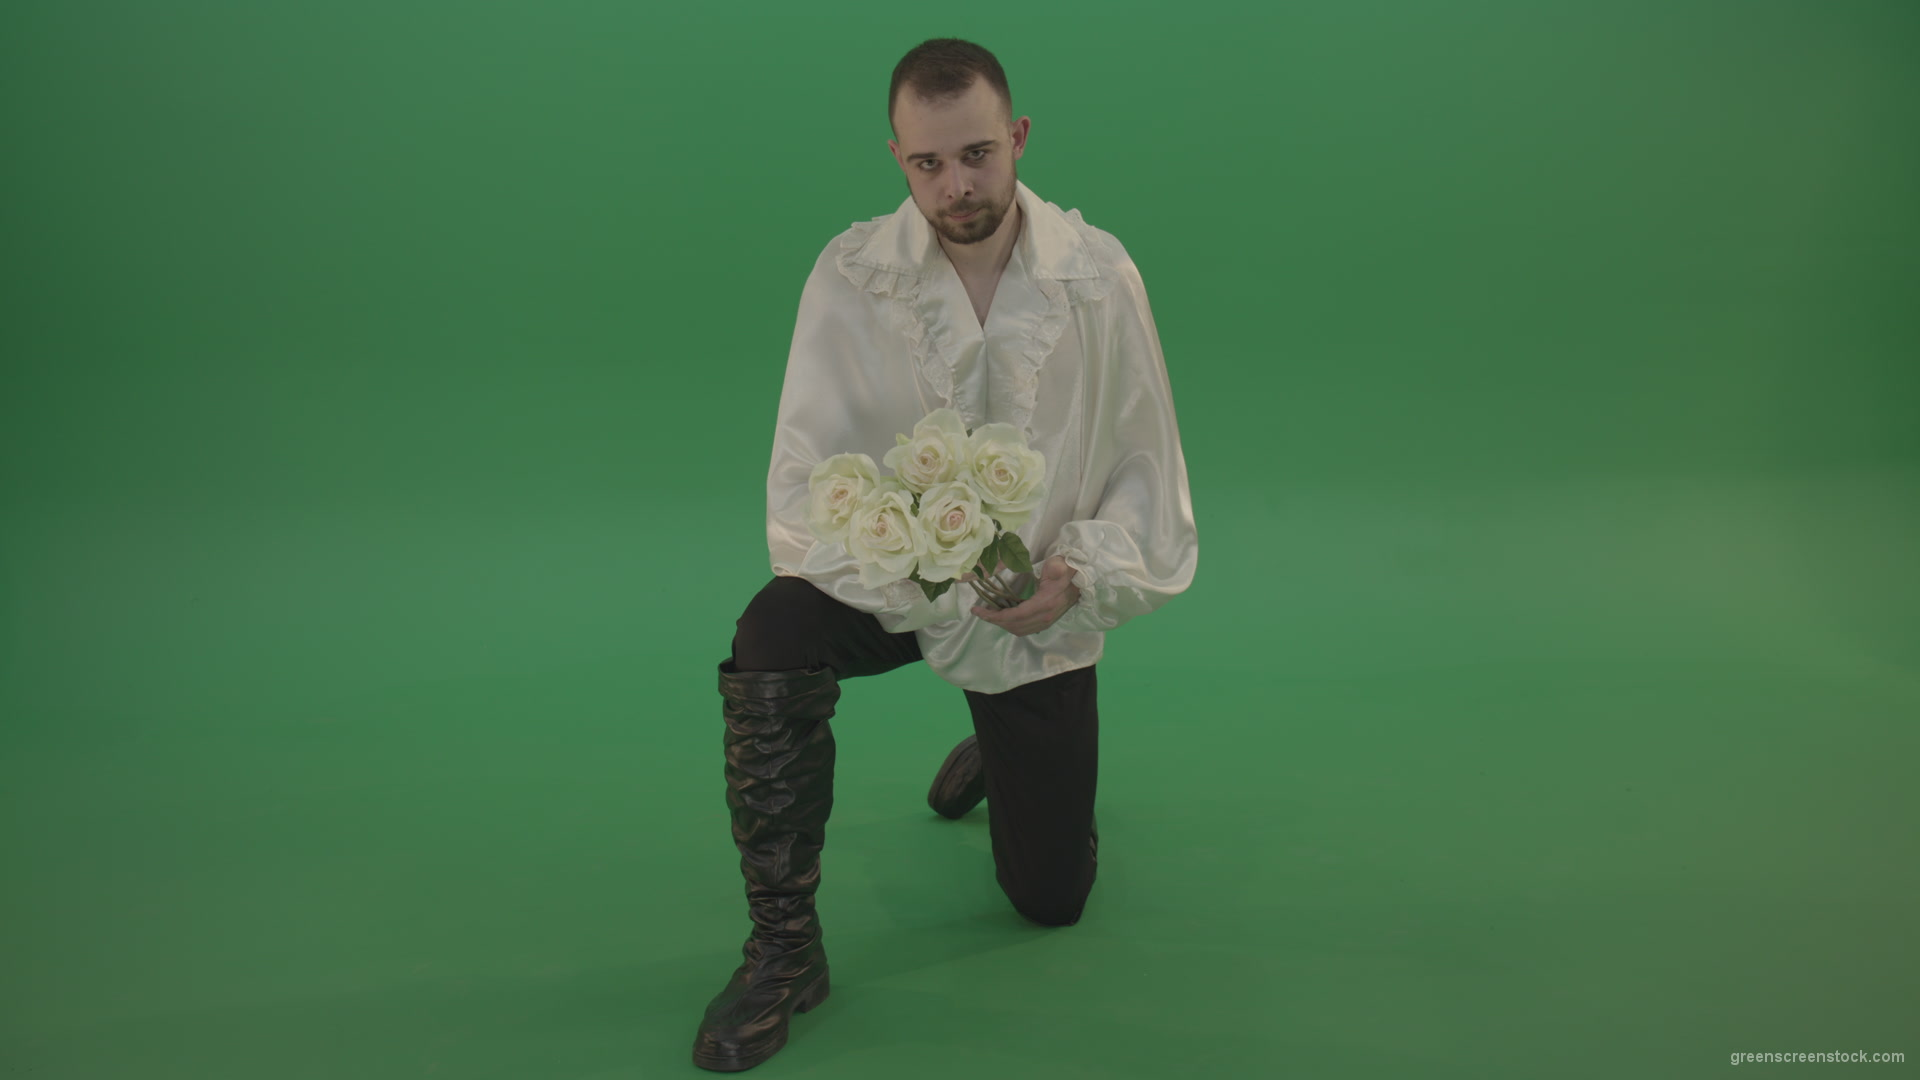 Medieval-man-gives-white-flowers-standing-on-one-knee-isolated-in-green-screen-studio_002 Green Screen Stock